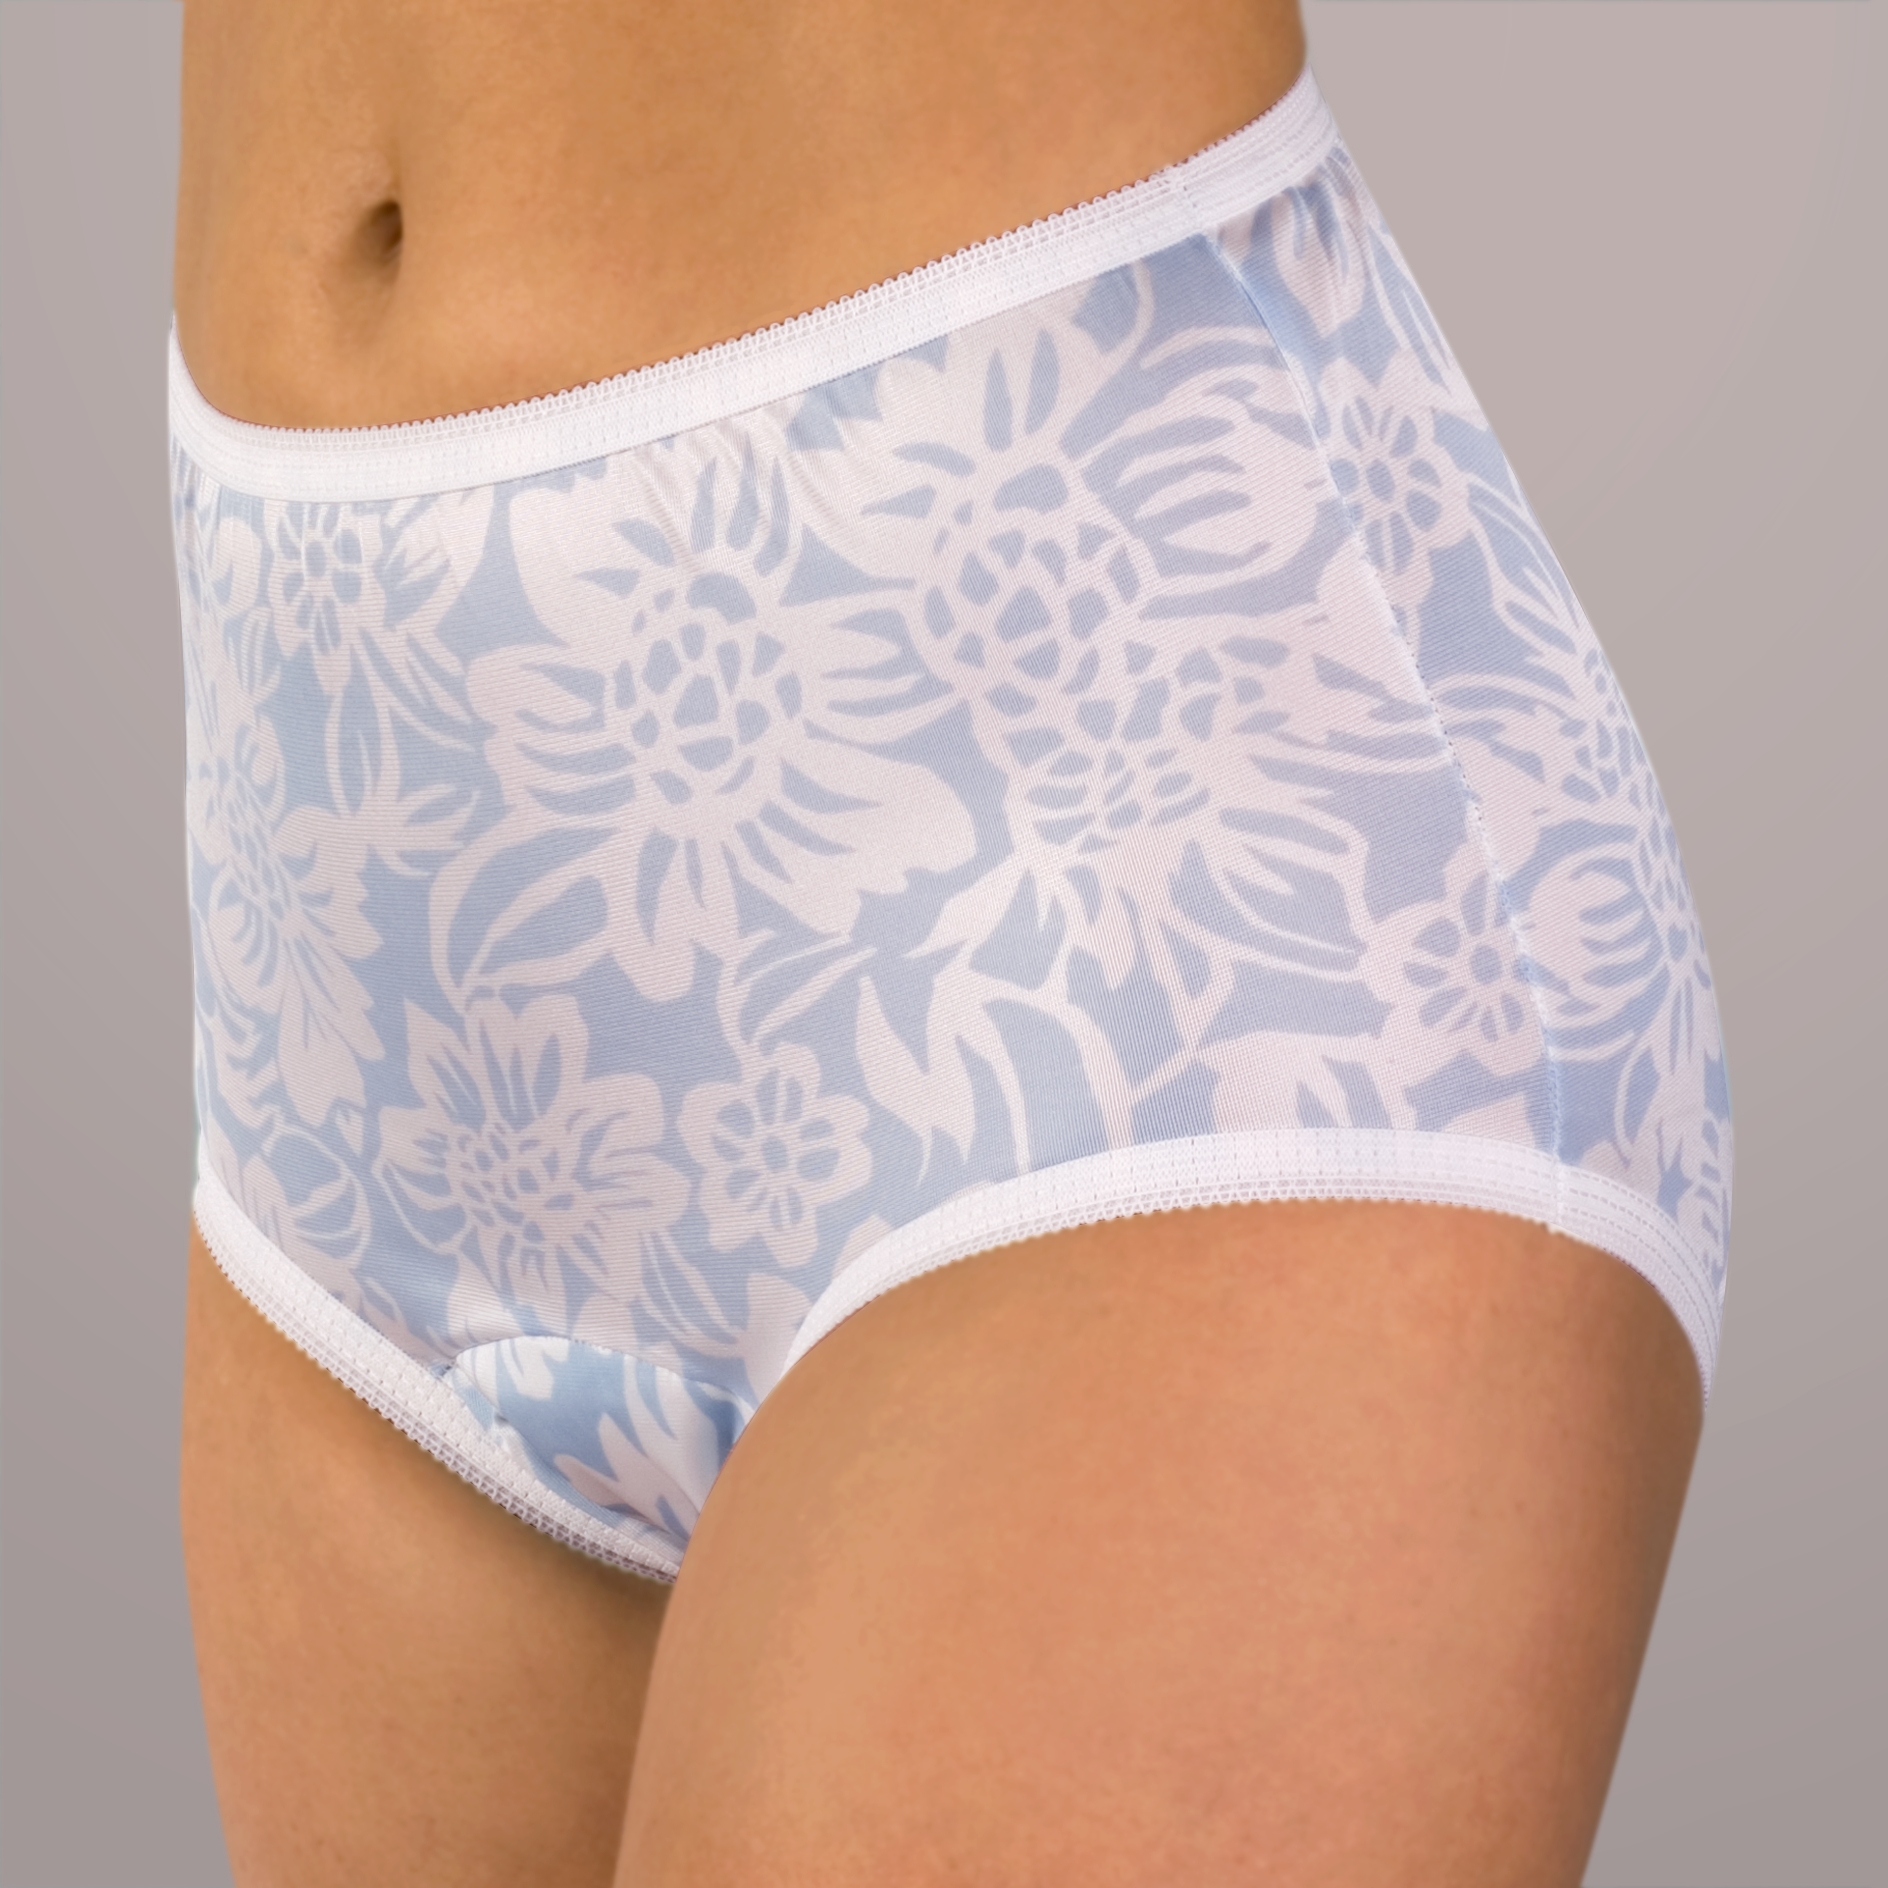 Stylish Washable incontinence underwear for women – by TENA